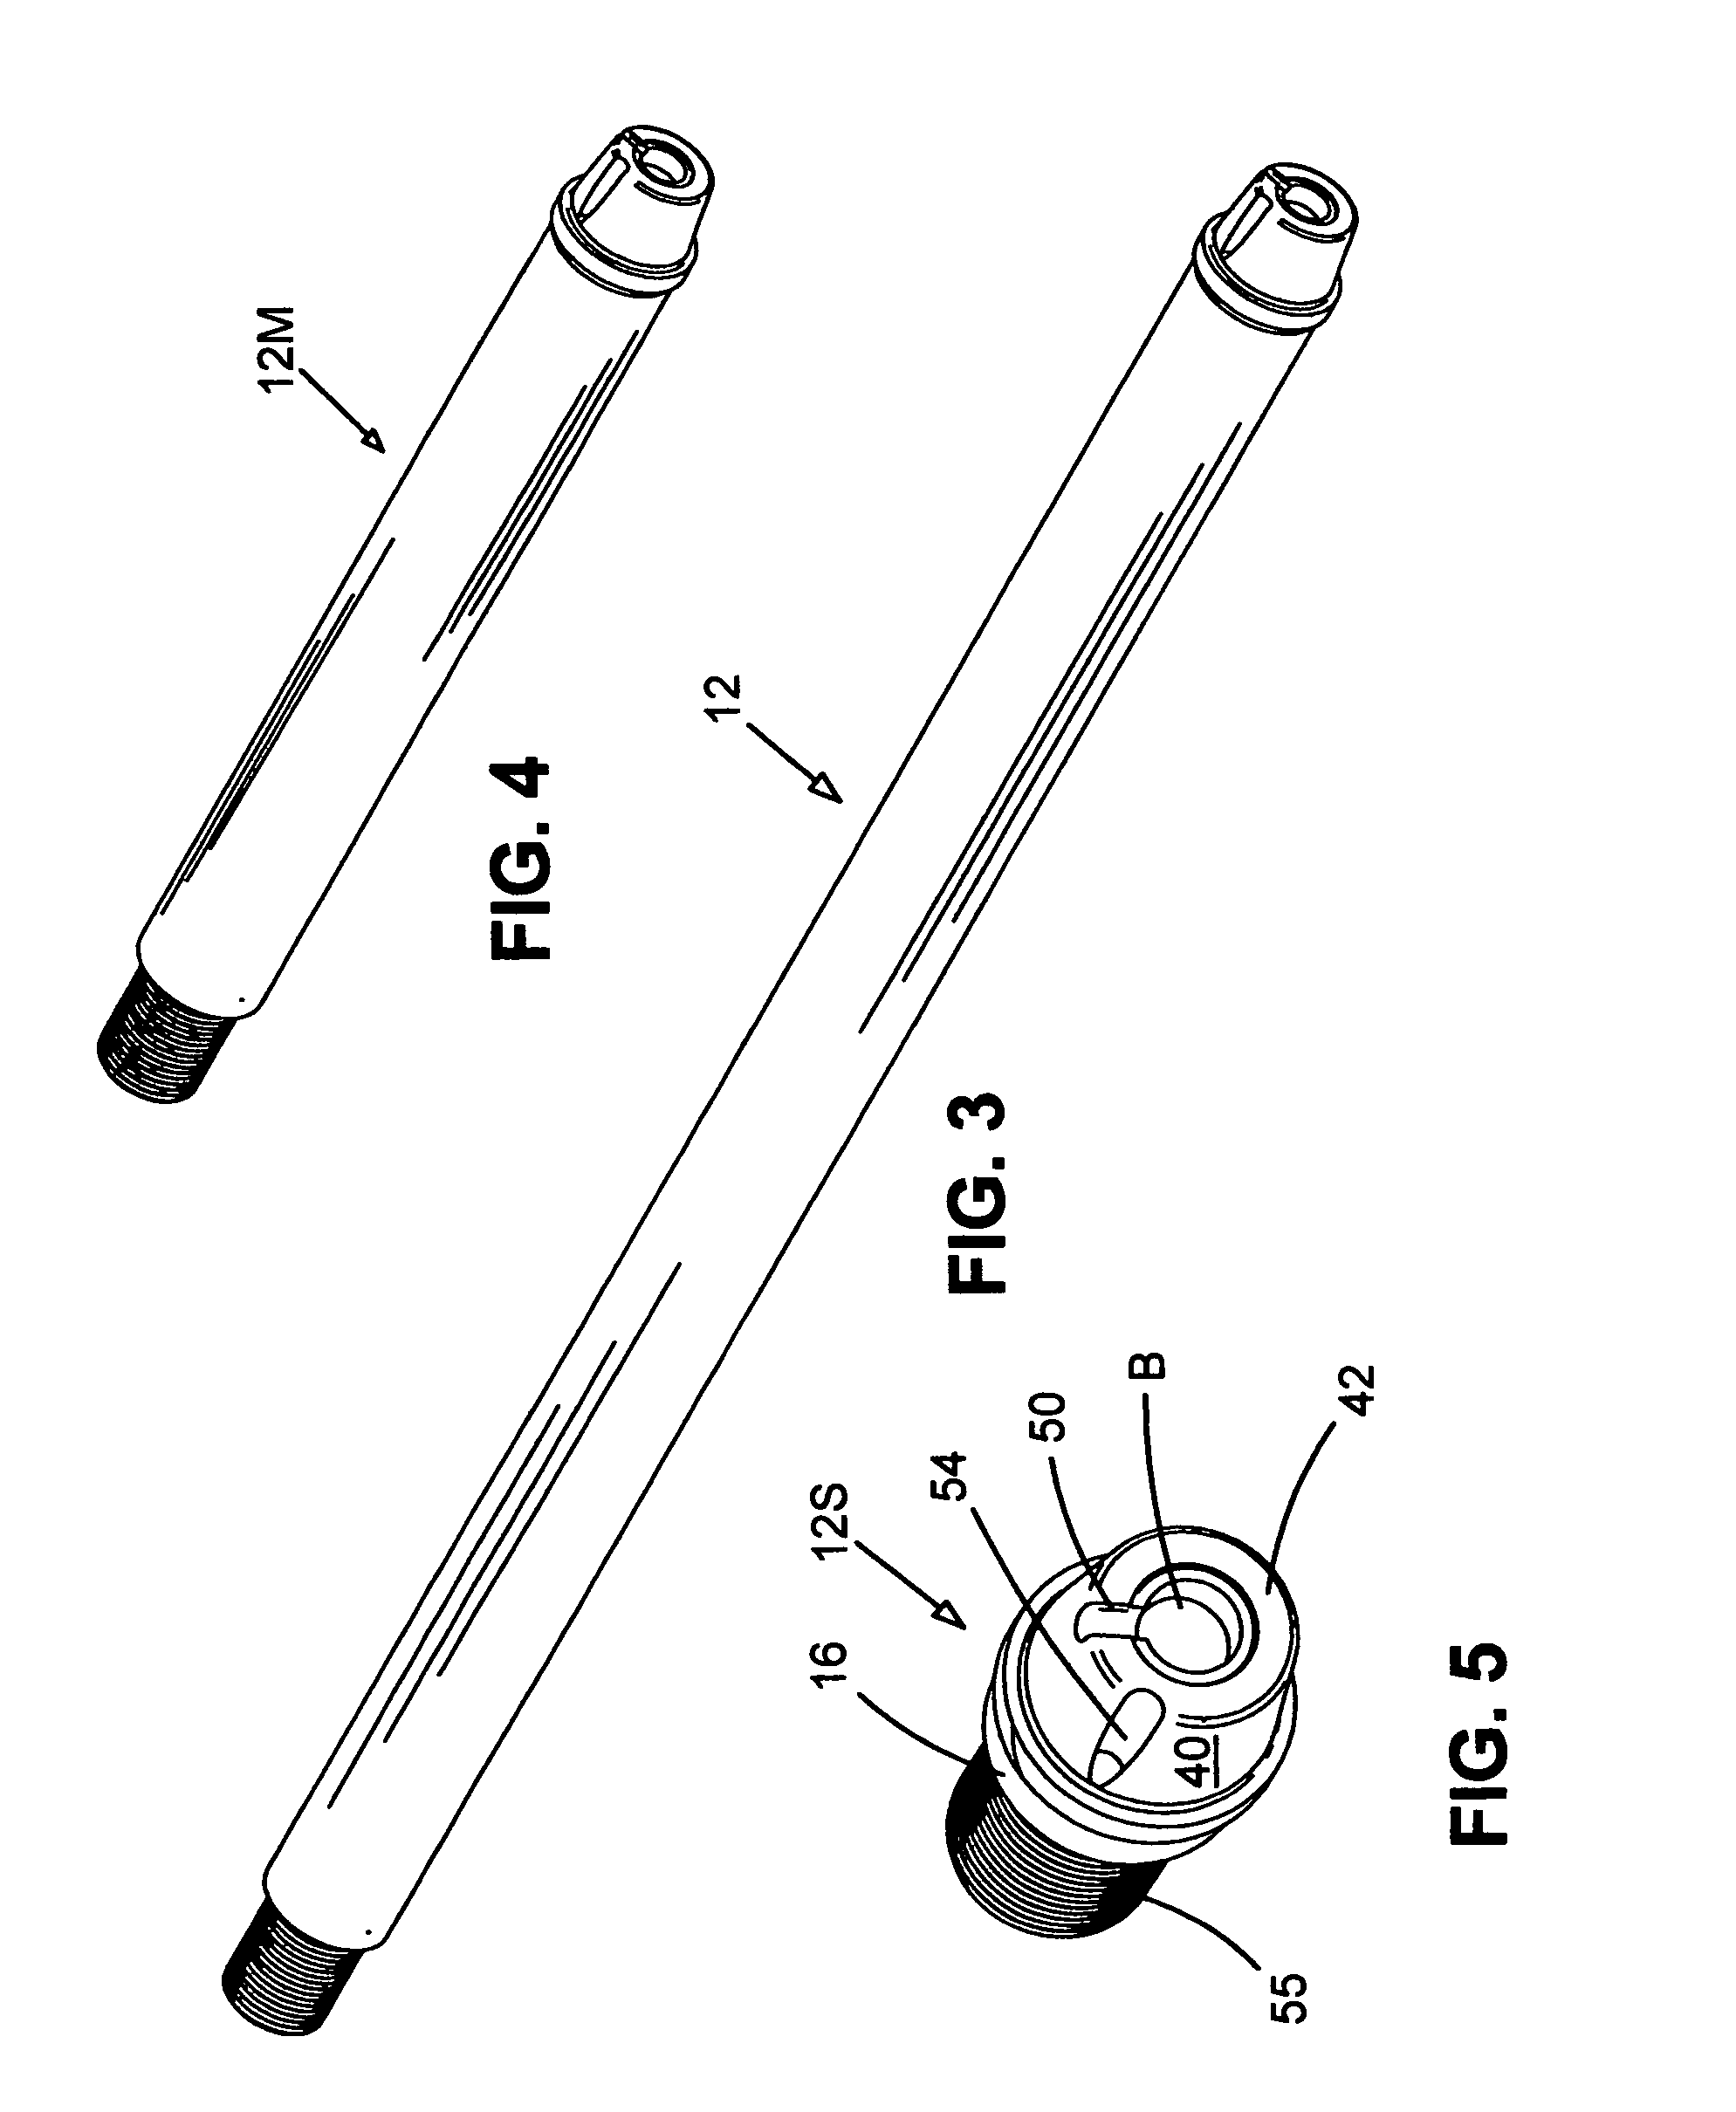 Gas-operated guns with demountable and interchangeable barrel sections and improved actuation cylinder construction